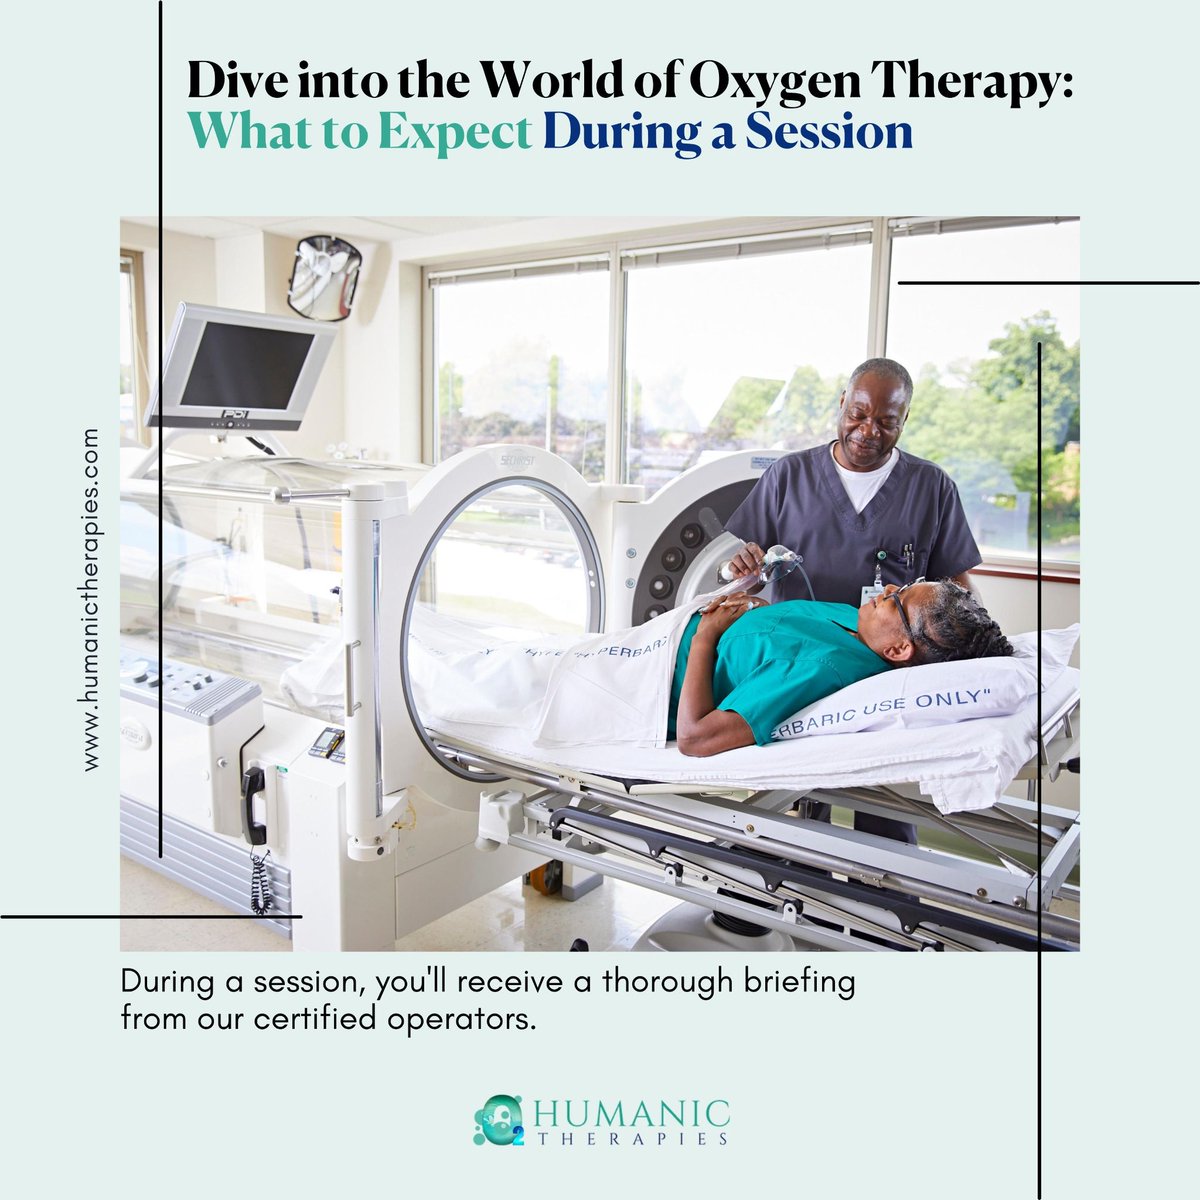 During a session, you'll receive a thorough briefing from our certified operators.

Once inside the chamber, you can simply lay back, relax, and make yourself comfortable. 
-----
🌐  humanictherapies.com
.
#OxygenTherapy #HyperbaricChamber #TherapeuticJourney